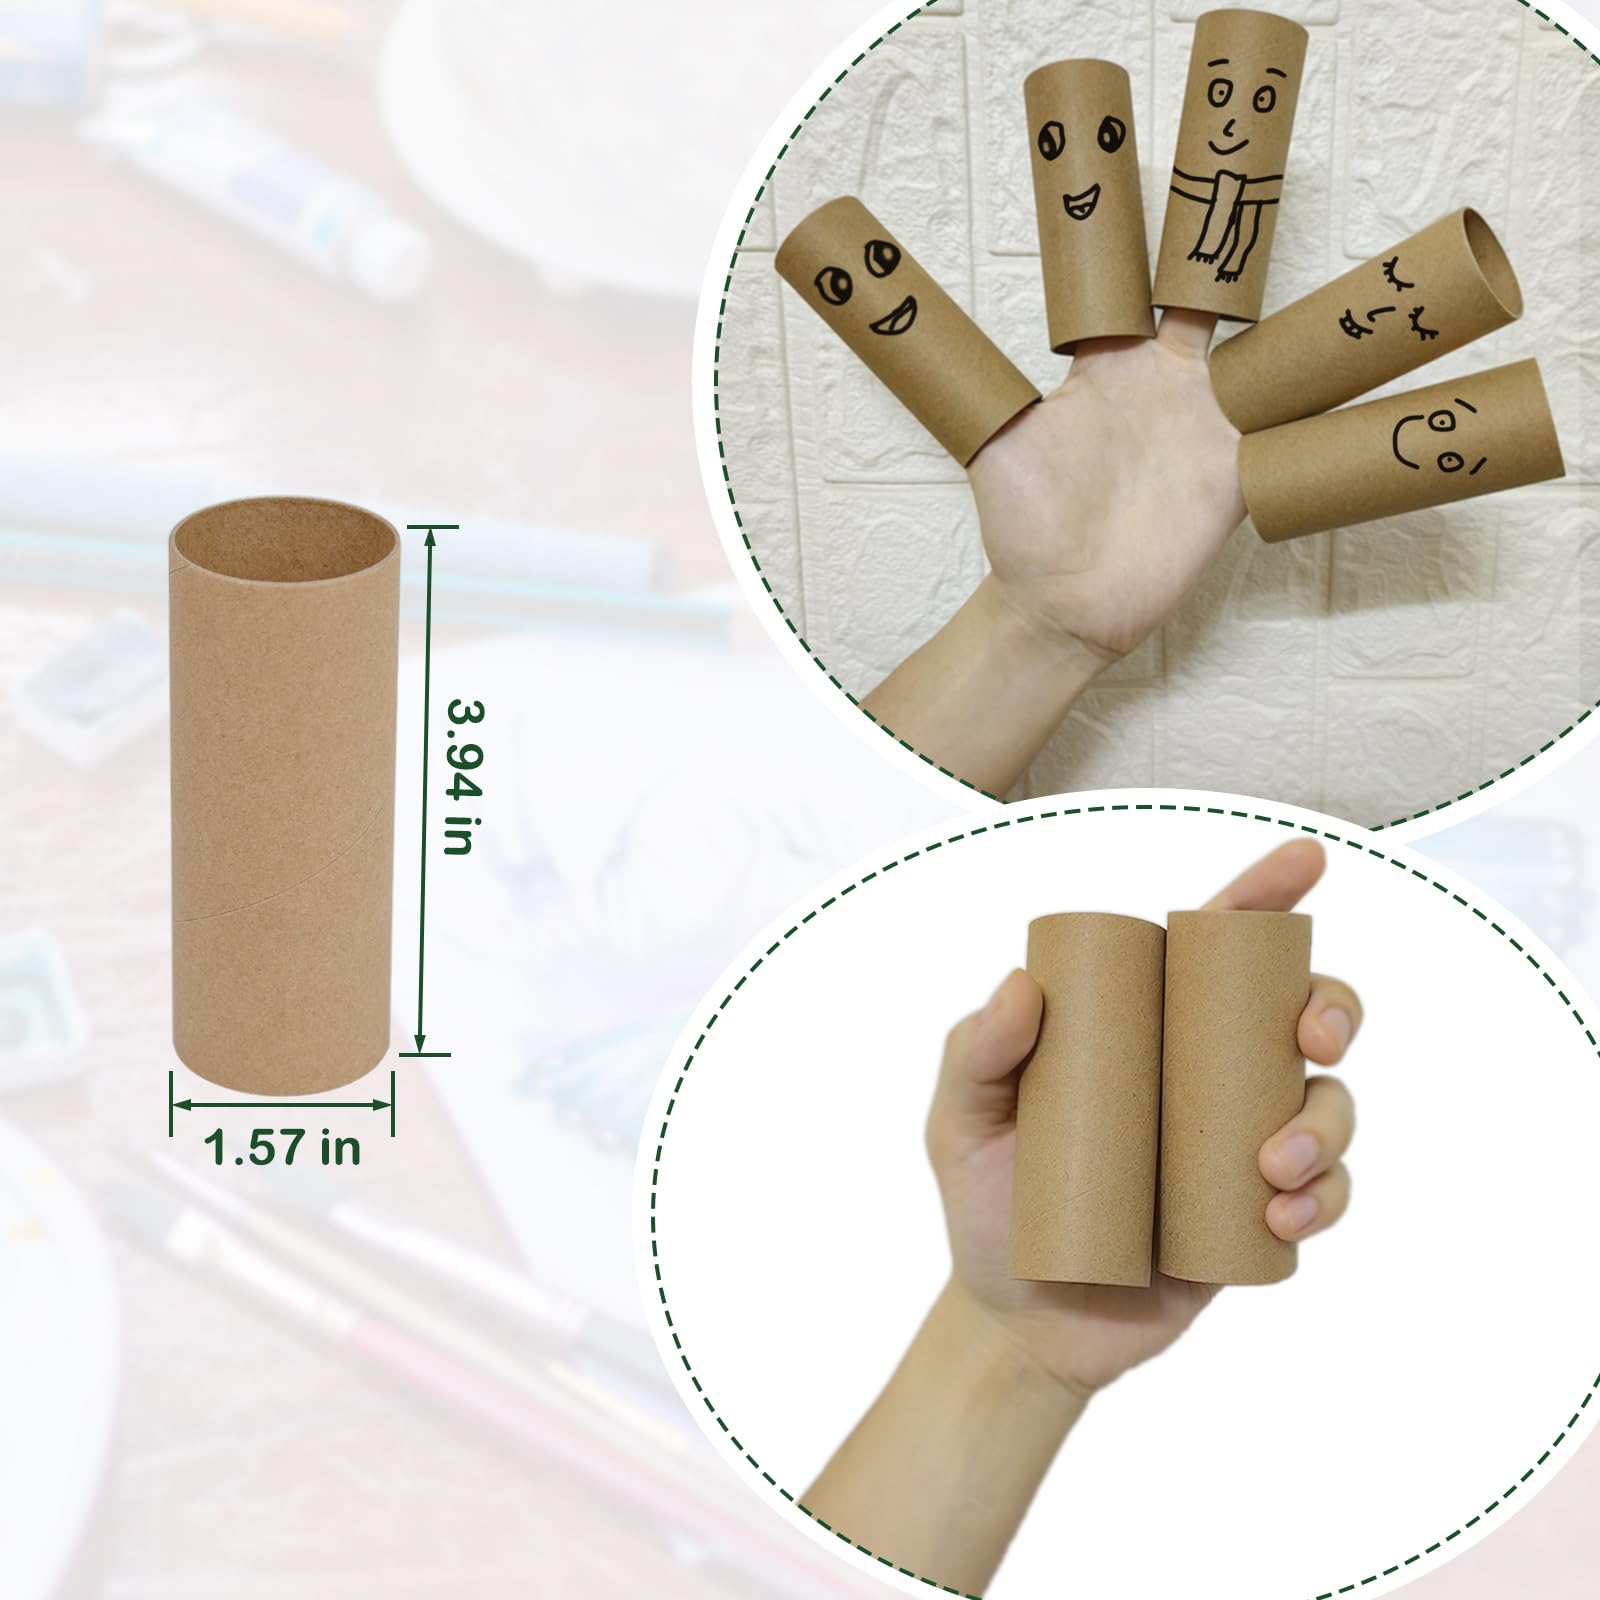 HESESOH 100 Pack Cardboard Tubes for Crafts - 1.57 x 3.94 Inches - Brown Toilet Paper Empty Rolls Round Thick Tubes Sturdy for Classroom Family Handmade DIY Projects